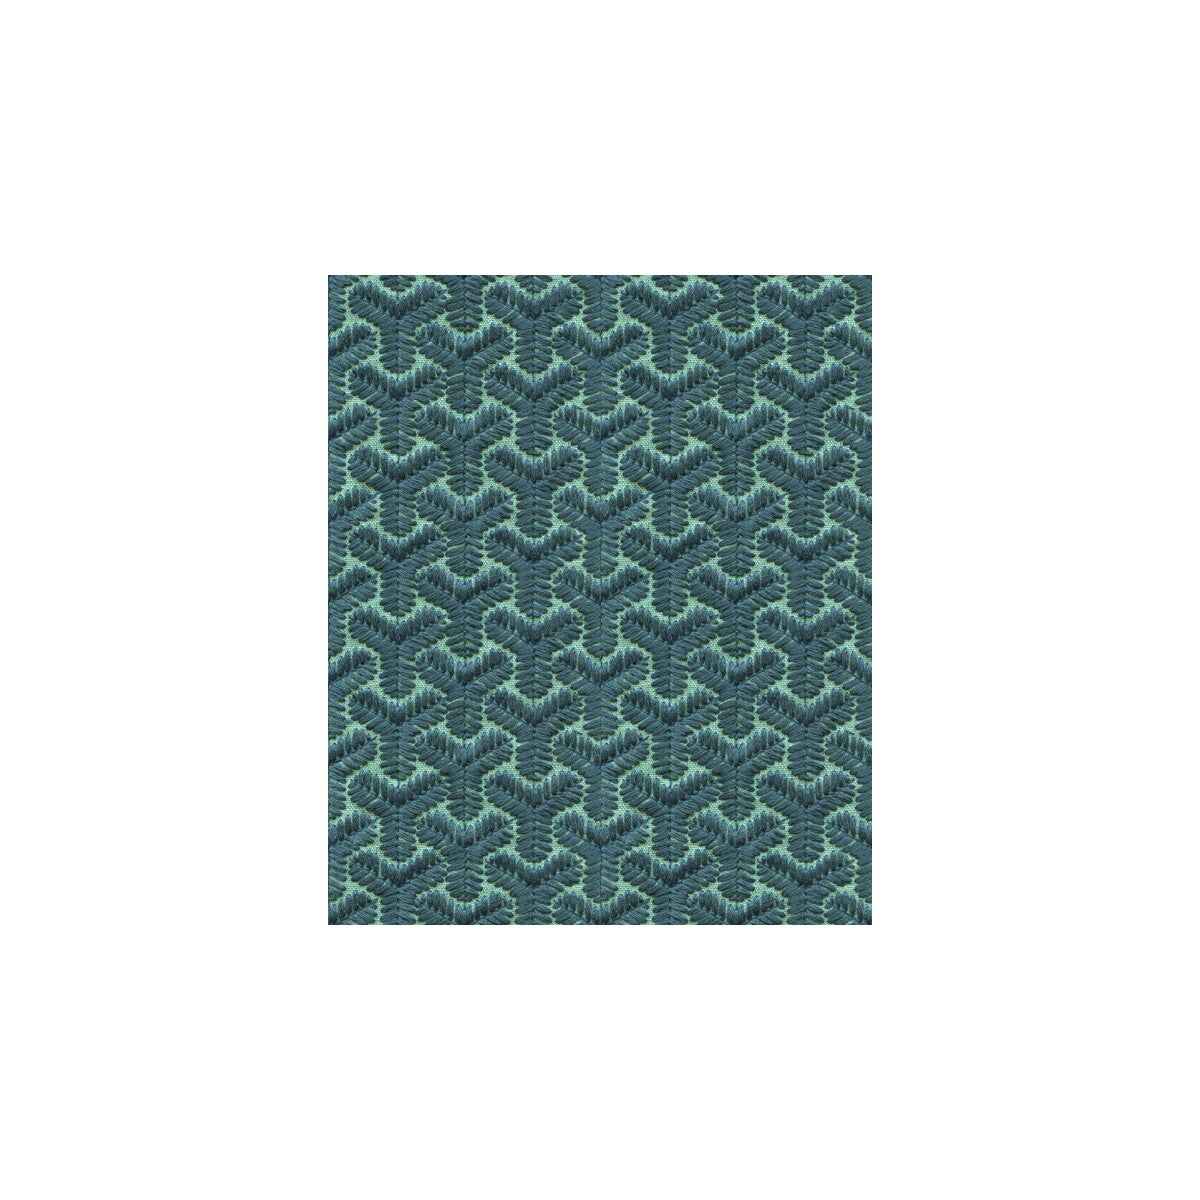 Chengtudoor Emb fabric in blue/aqua color - pattern BF10523.2.0 - by G P &amp; J Baker in the David Hicks 3 By Ashley Hicks collection